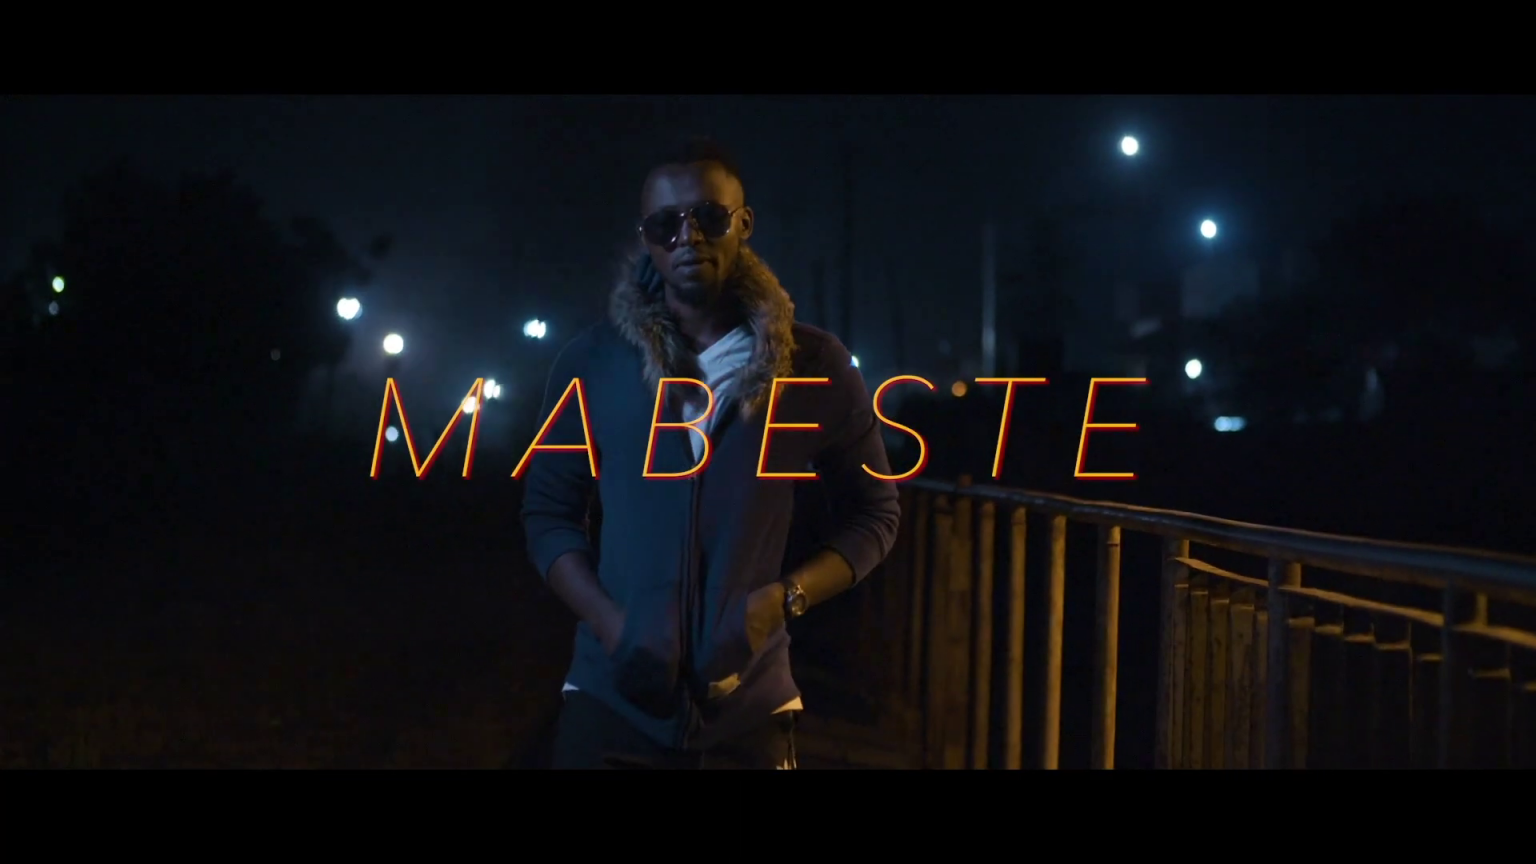 (OFFICIAL VIDEO) Mabeste - QUALIFY Mp4 Download